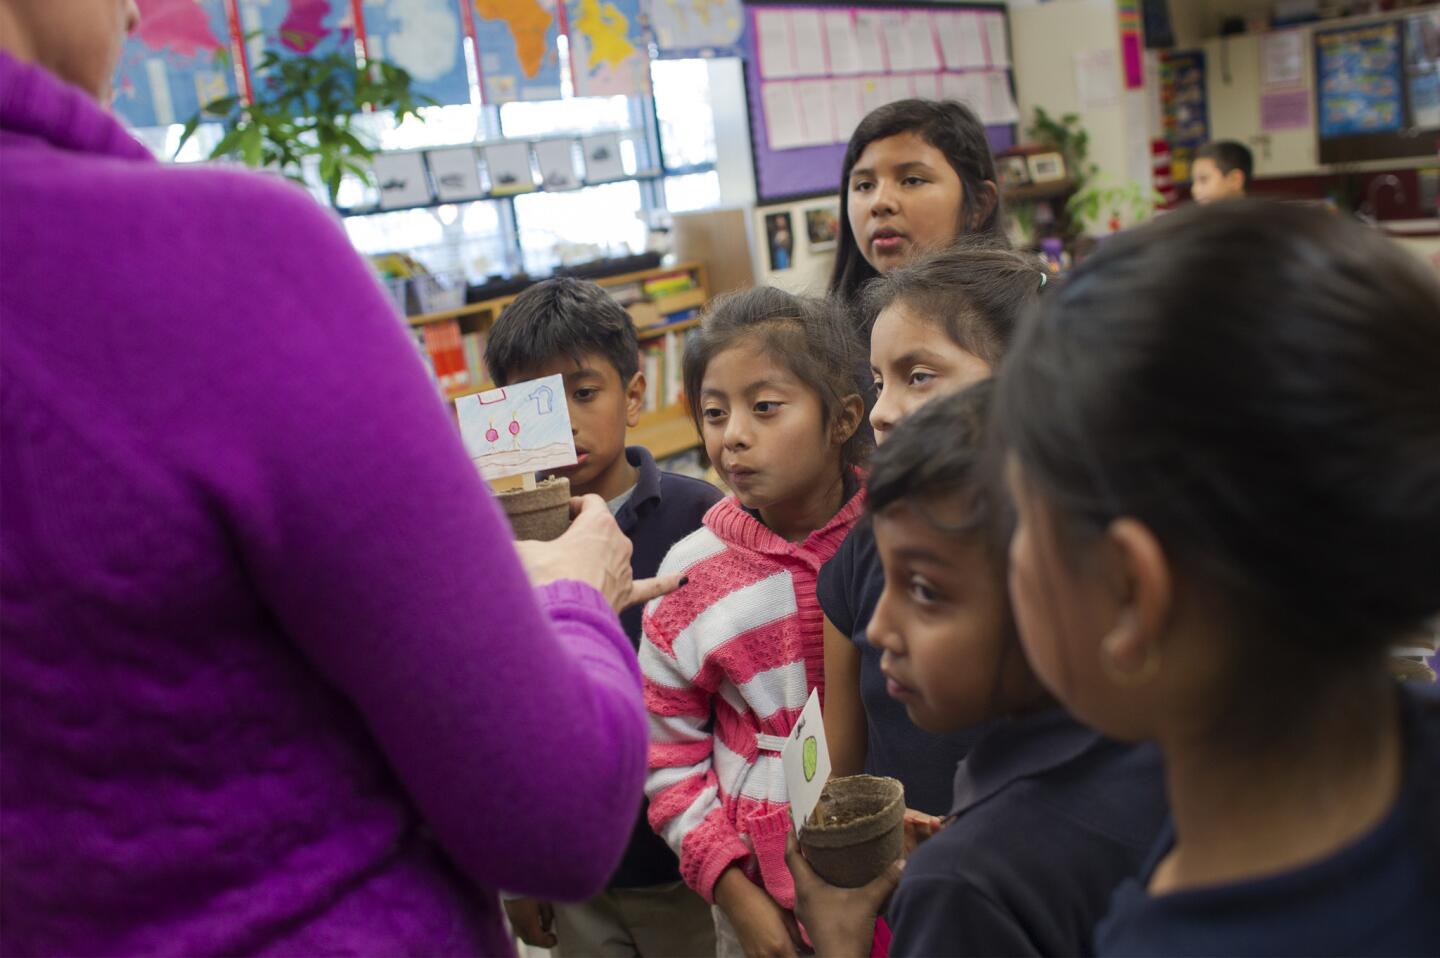 Third-grade teacher Sylvia Rubalcava discusses new seedlings with her students during English development class at Gratts Elementary School in Los Angeles. A GOP-driven federal education bill could cut $782 million for LAUSD low-income schools over the next six years.